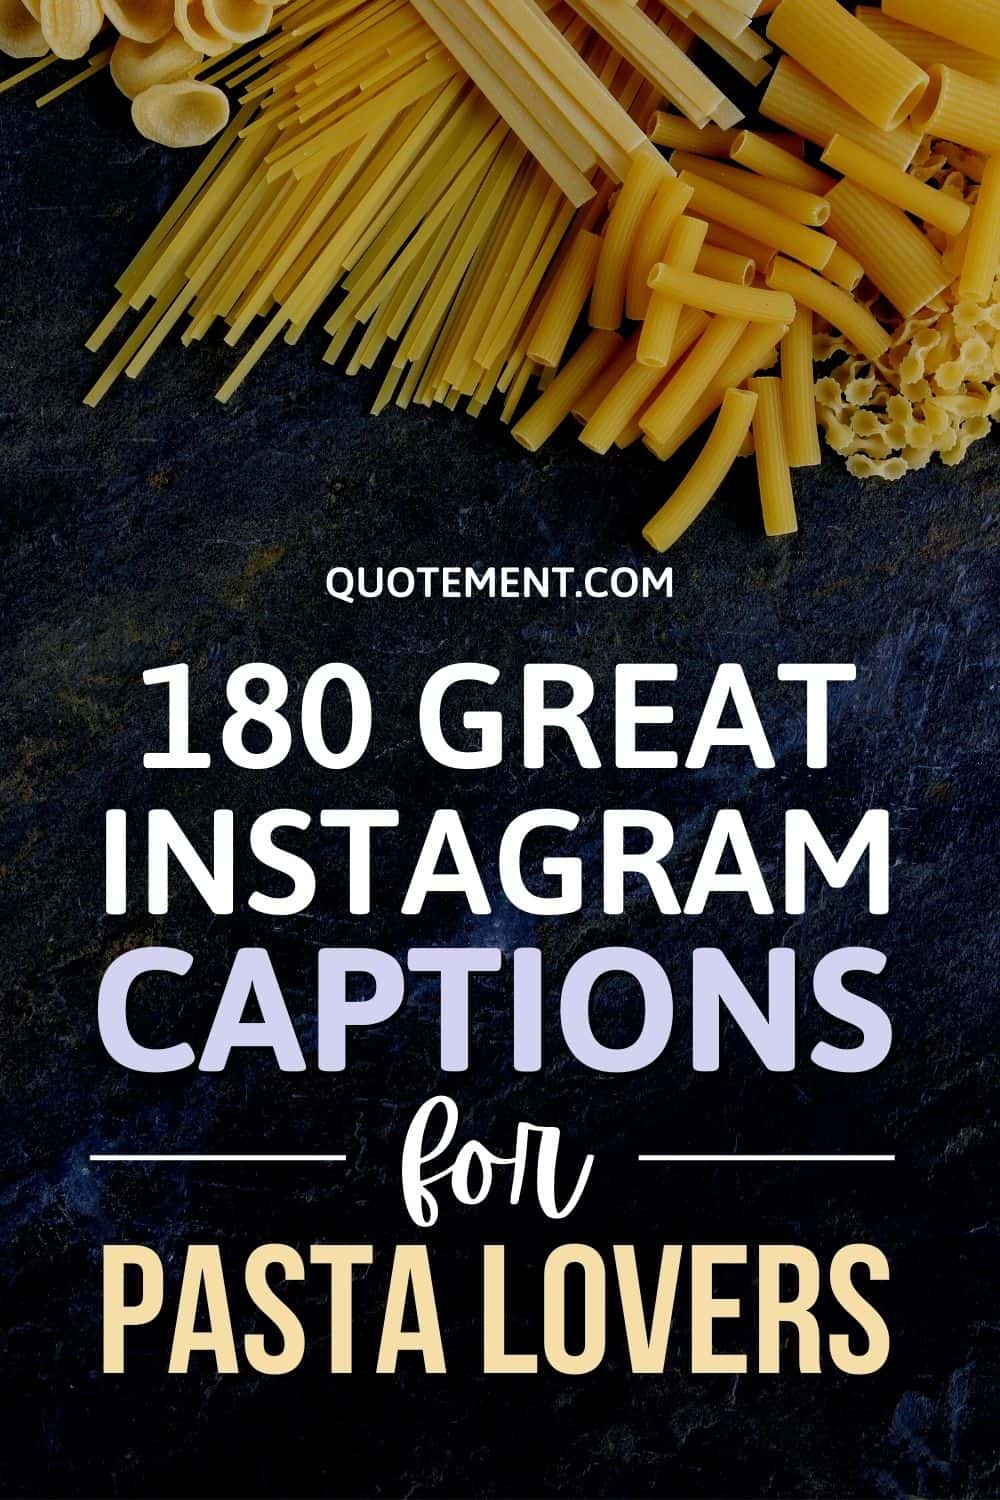 180 Awesome Instagram Captions For Pasta Lovers + Quotes